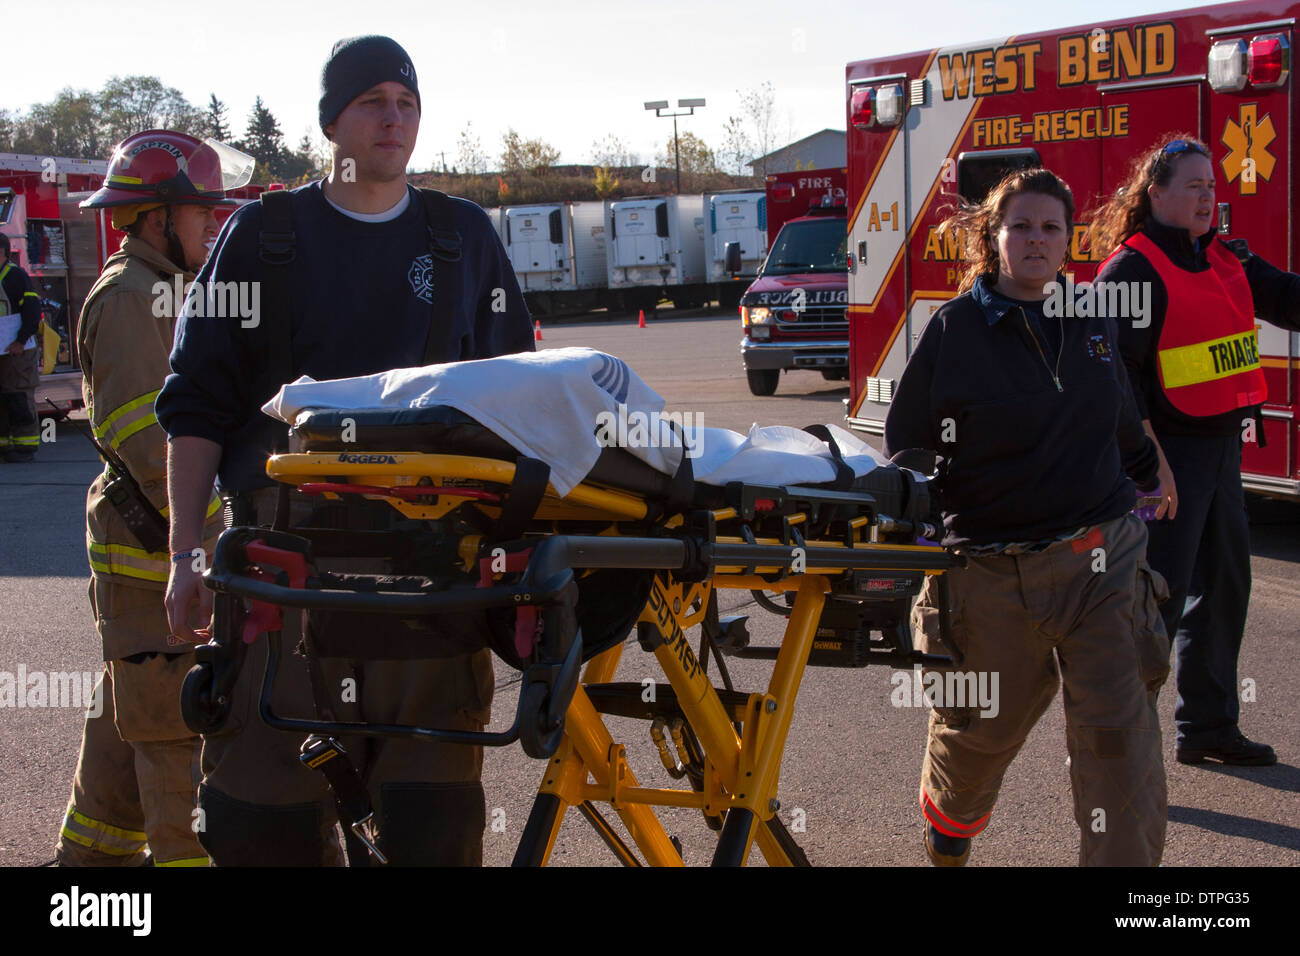 Emts arriving at scene of a mass casualty incident Stock Photo